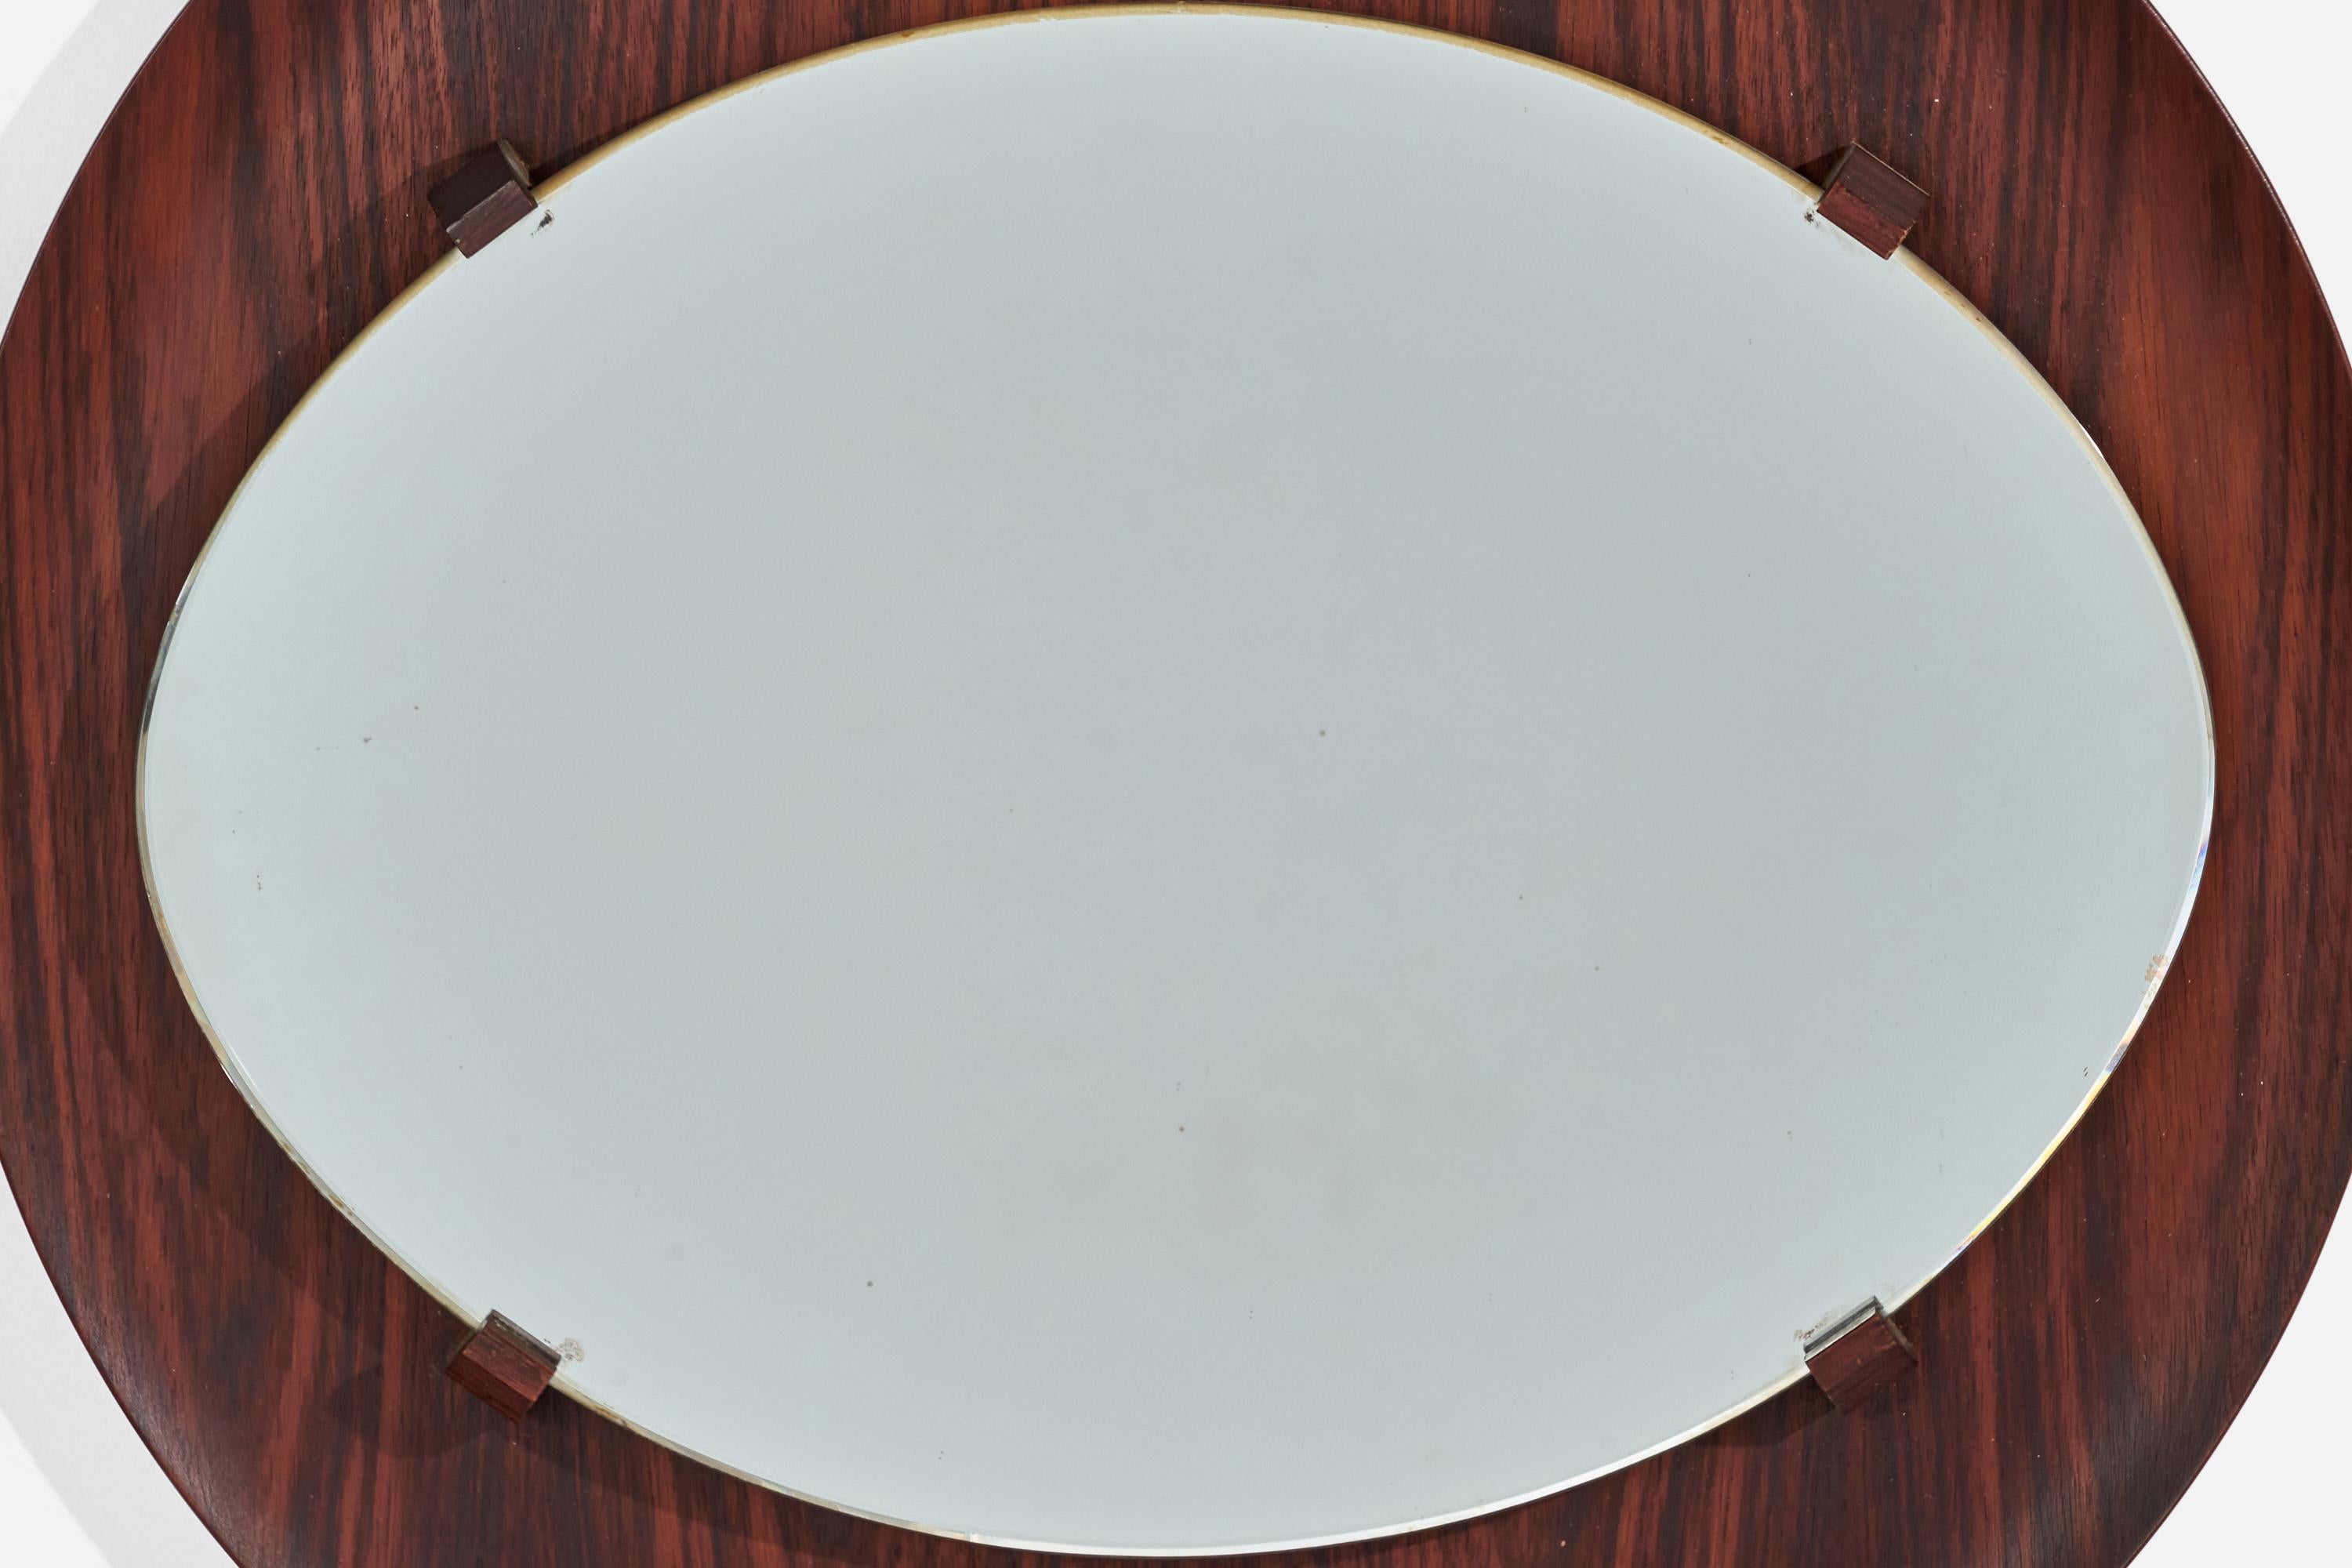 A rosewood wall mirror; design attributed to Franco Campo and Carlo Graffi and presumably produced by Home, Italy, 1950s.